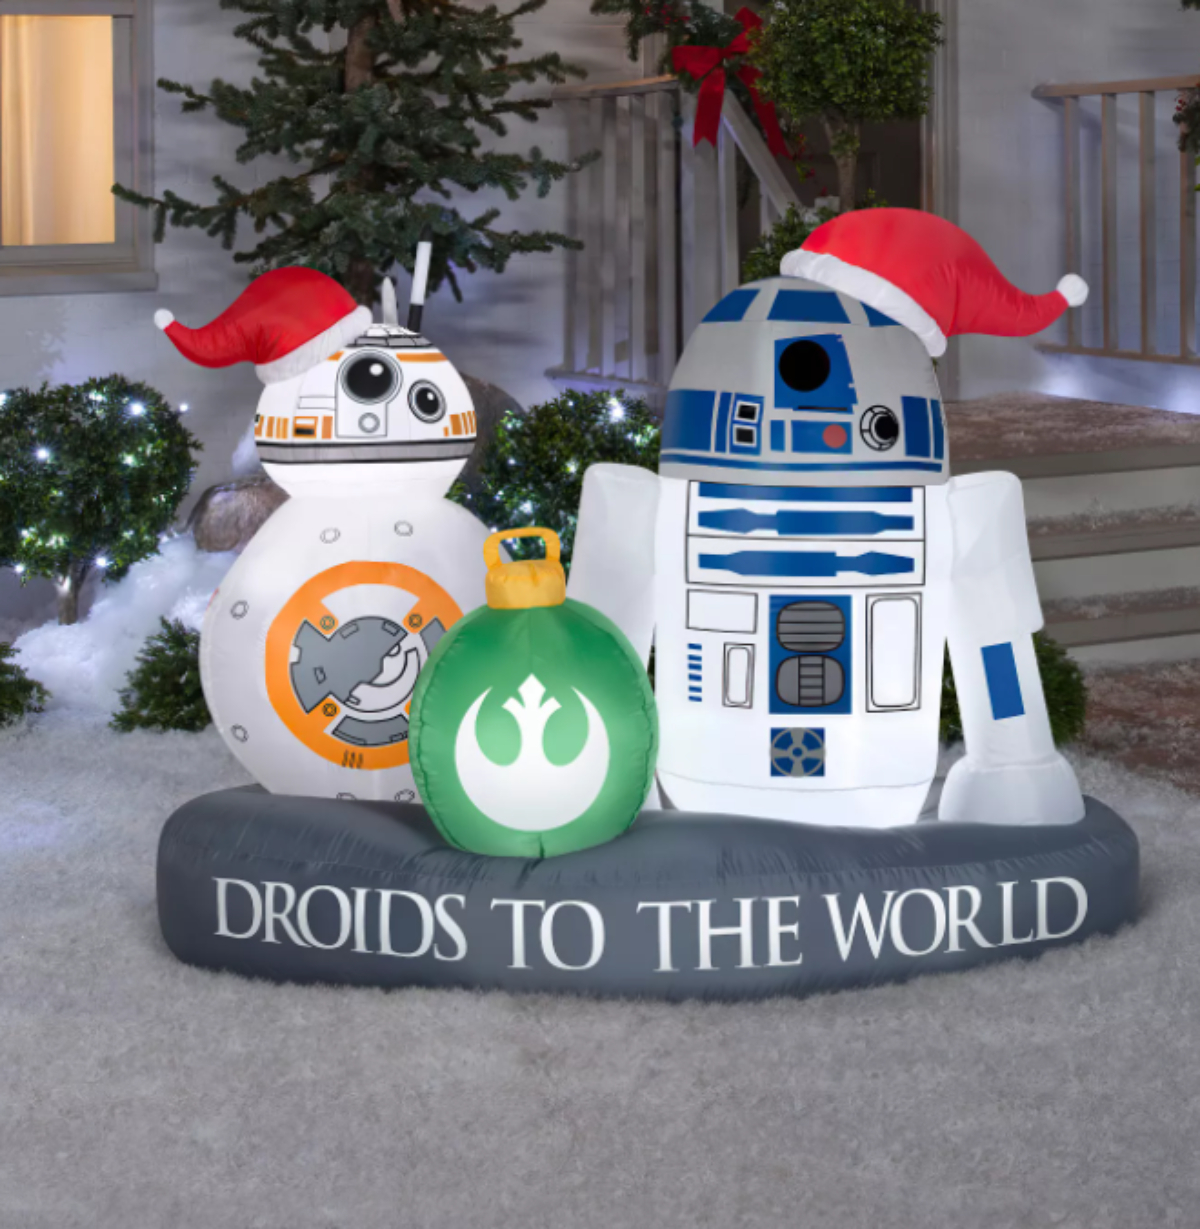 Light up your yard this Christmas with giant 'Star Wars' inflatables